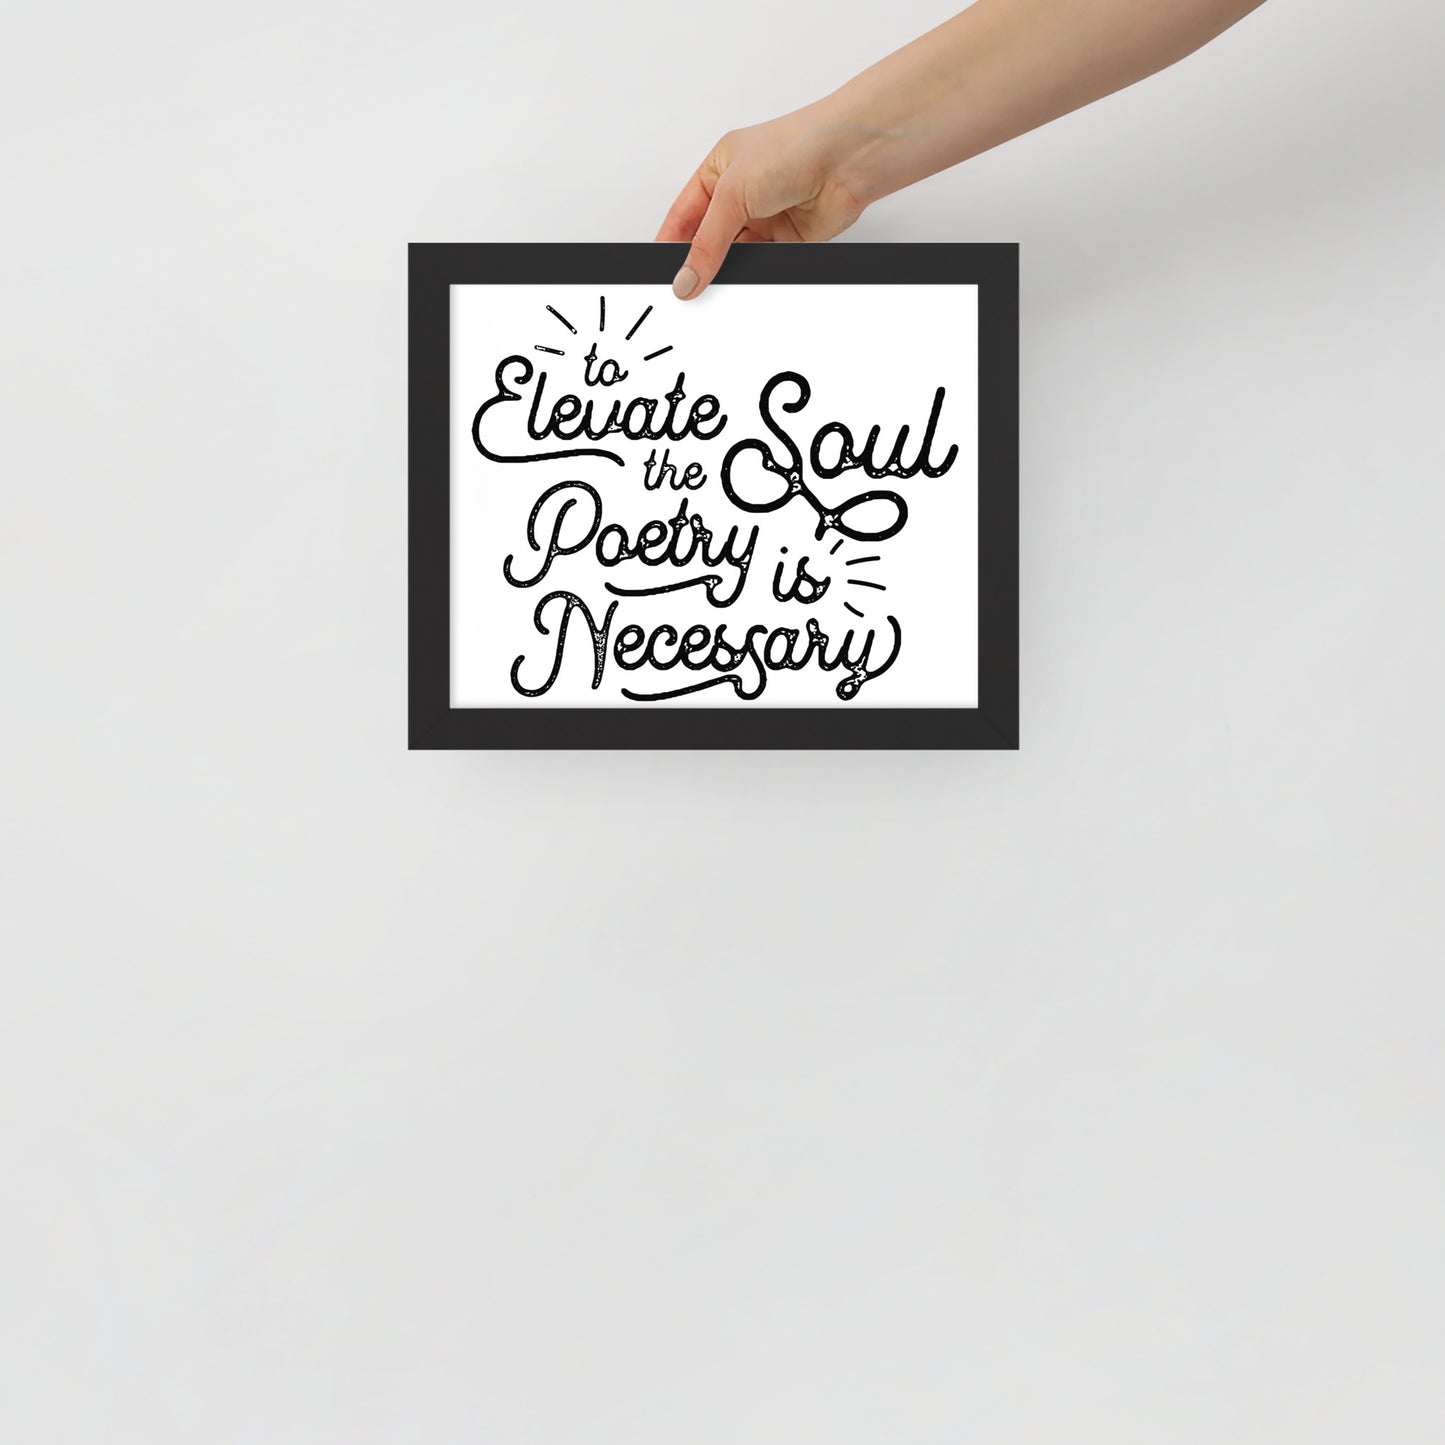 To Elevate the Soul Poetry is Necessary Framed Poster - 8 x 10 Black Frame